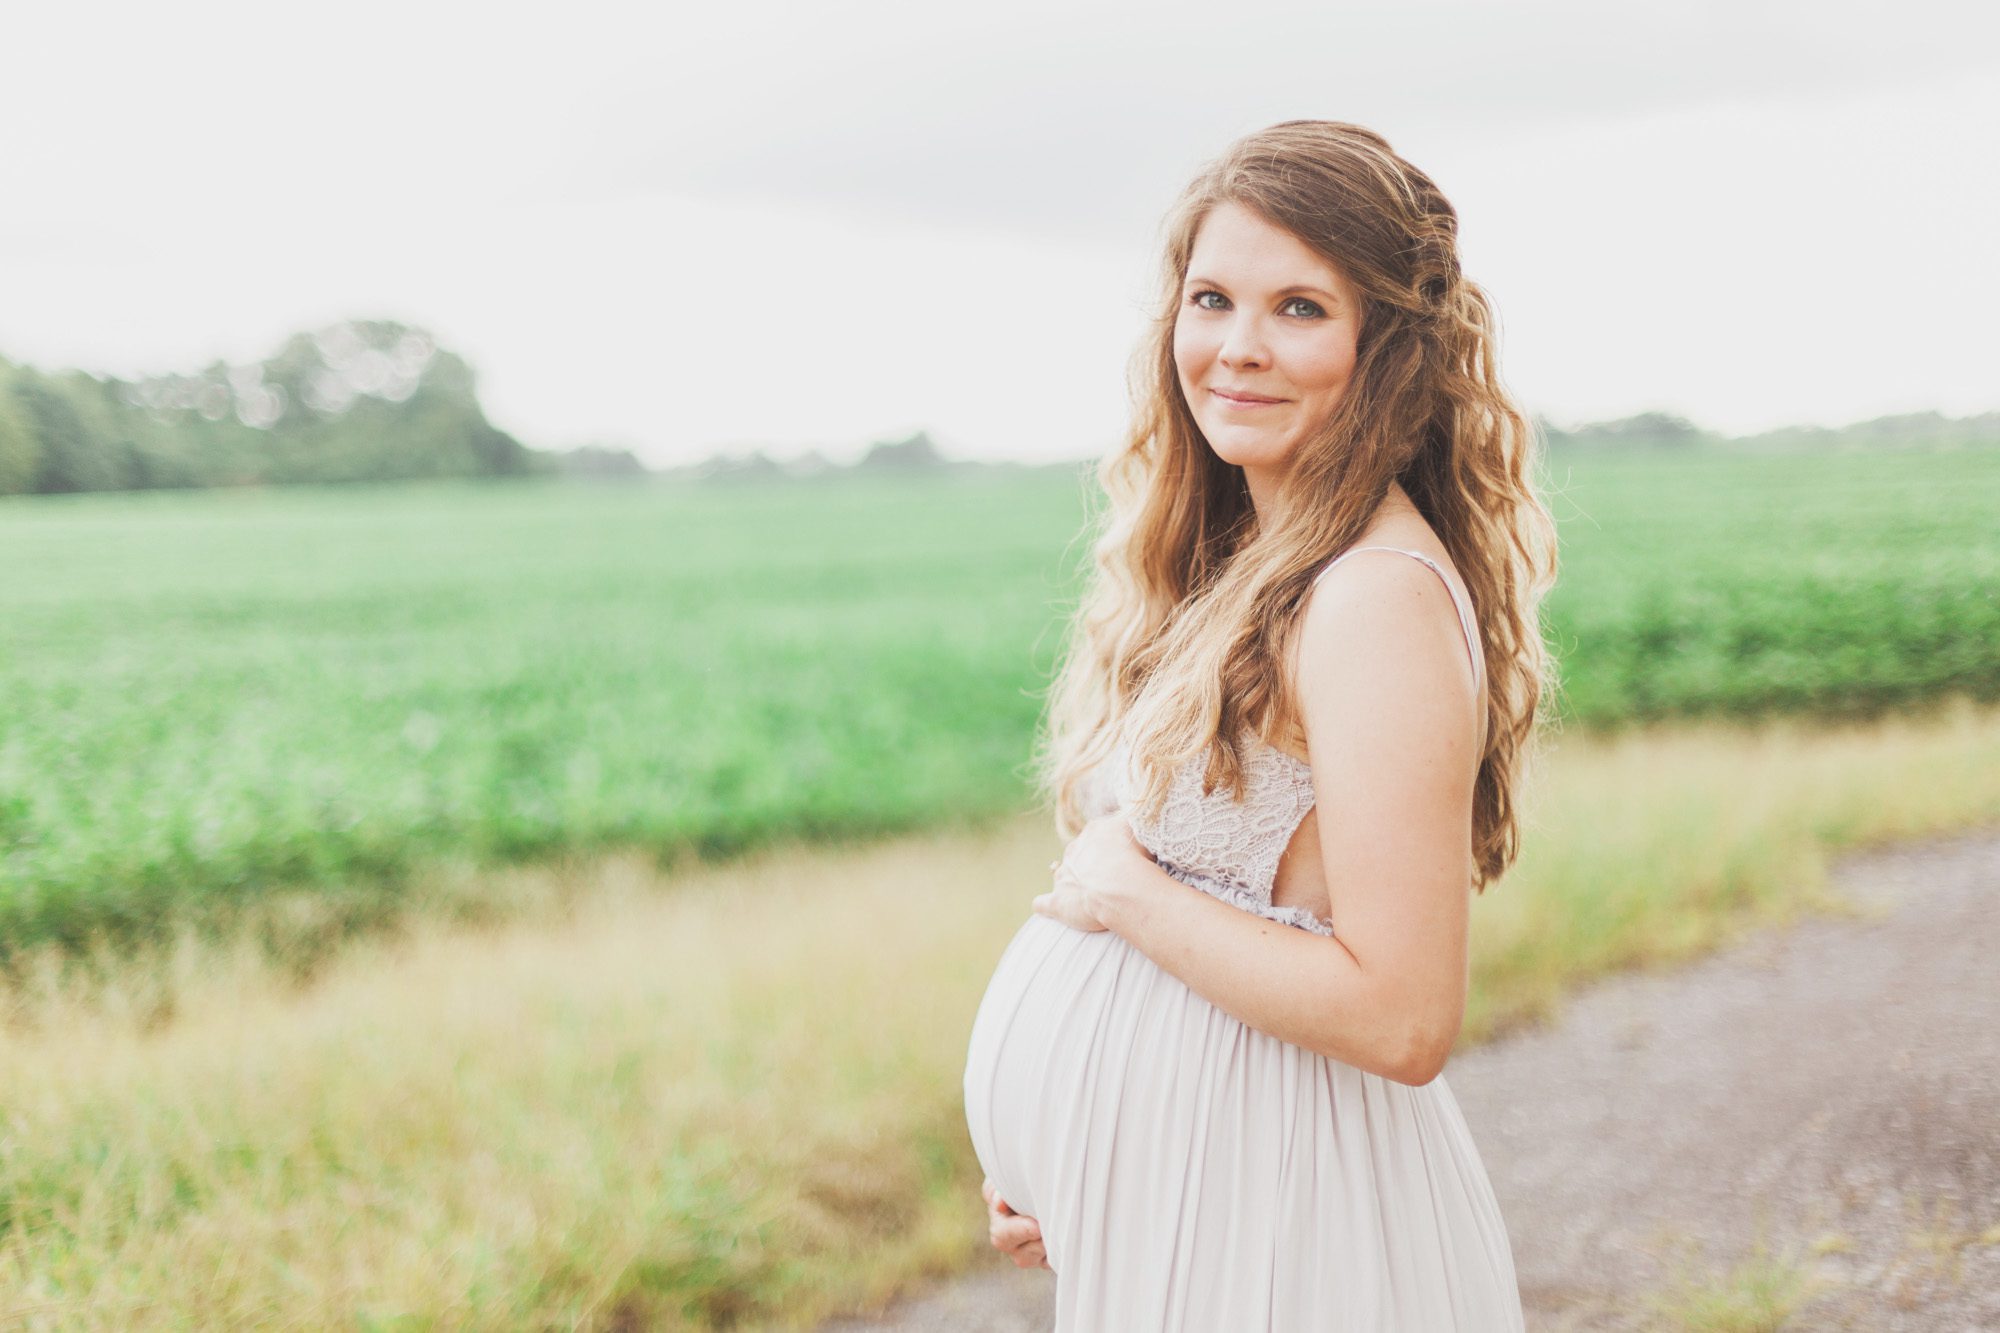 Mom in maternity gown / Maternity photos Nashville TN Krista Lee Photography